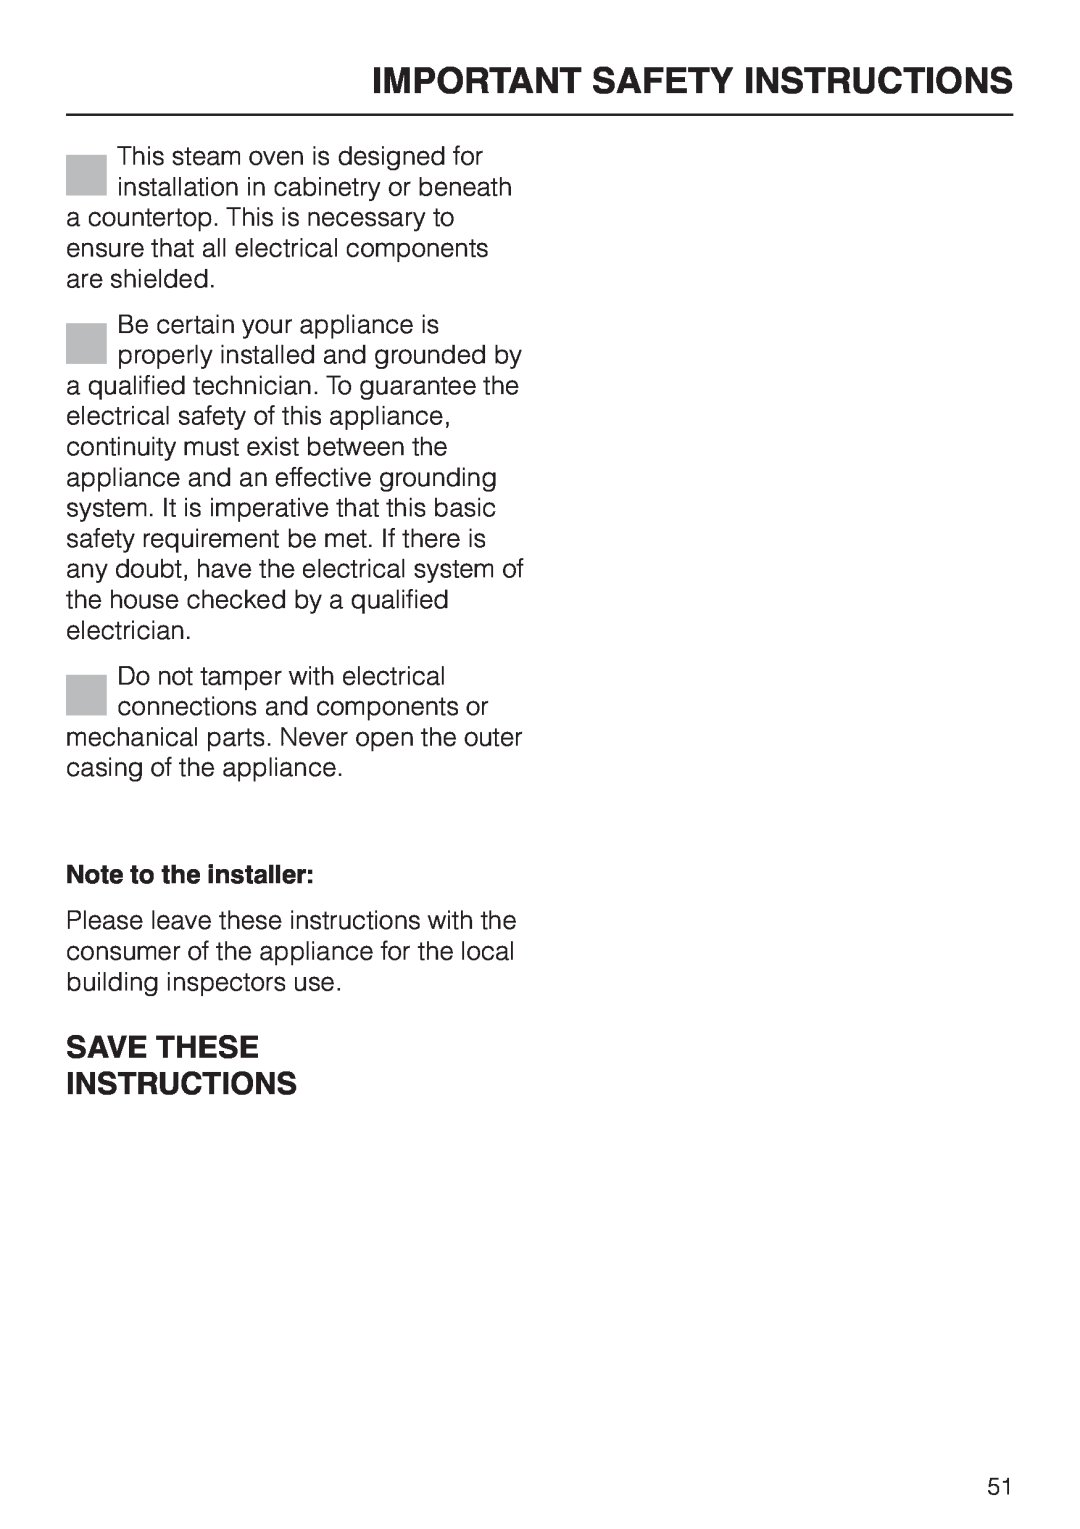 Miele DG 2661 installation instructions Save These Instructions, Important Safety Instructions, Note to the installer 